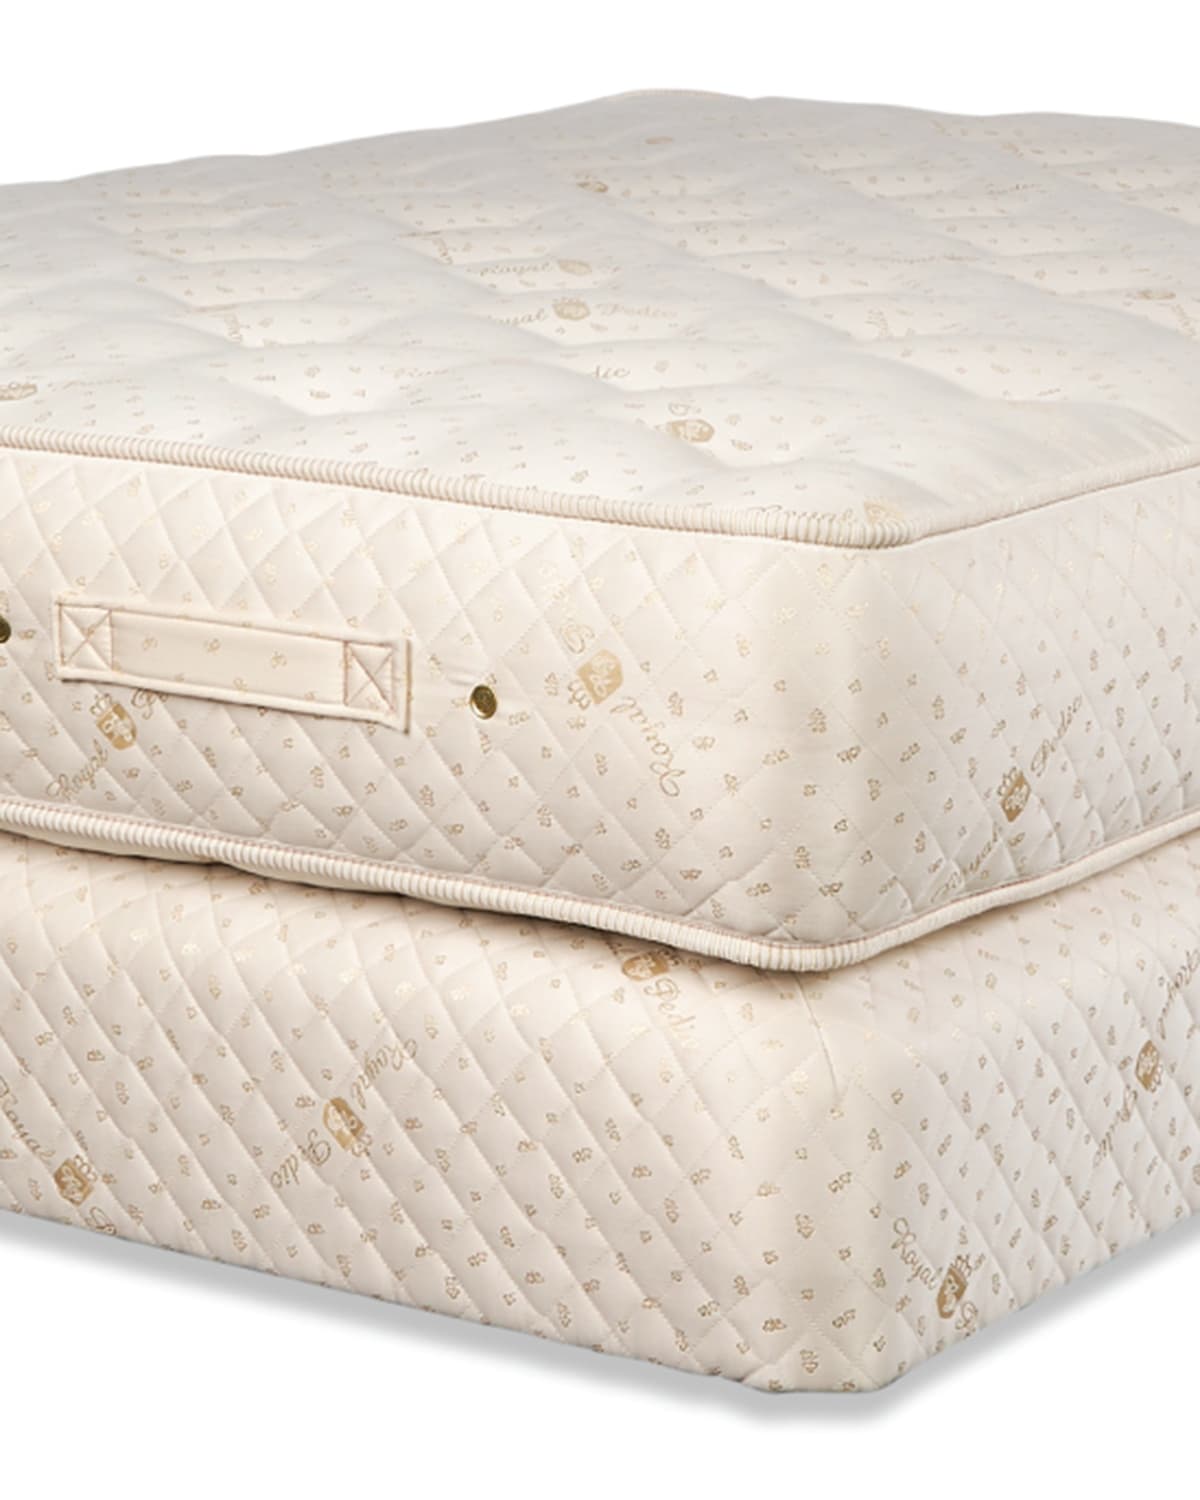 Royal-pedic Dream Spring Ultimate Firm Queen Mattress Set In Gold